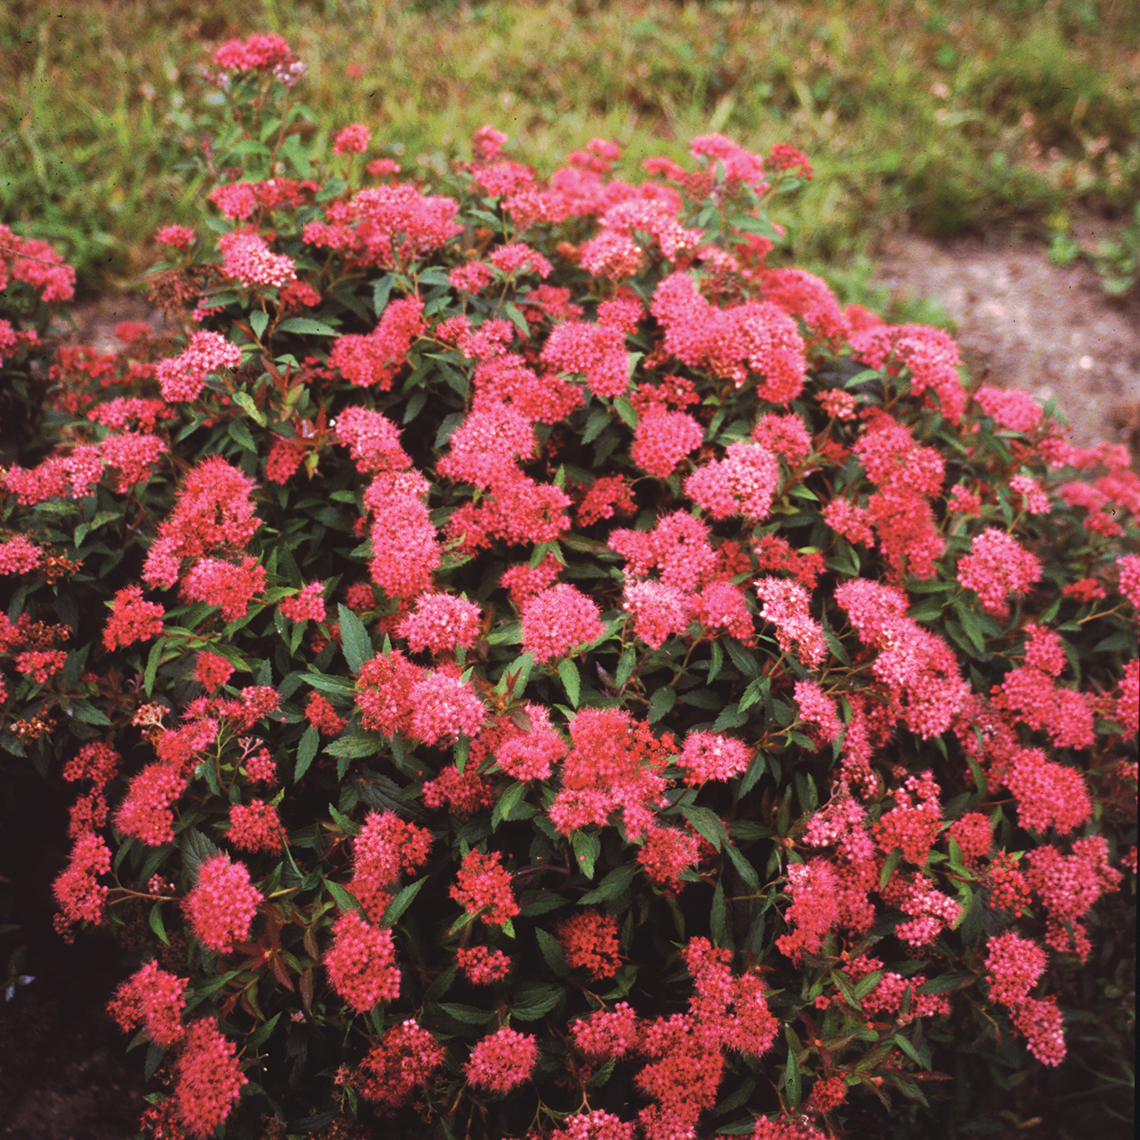 Mounded Spiraea Neon Flash covered in magenta flowers